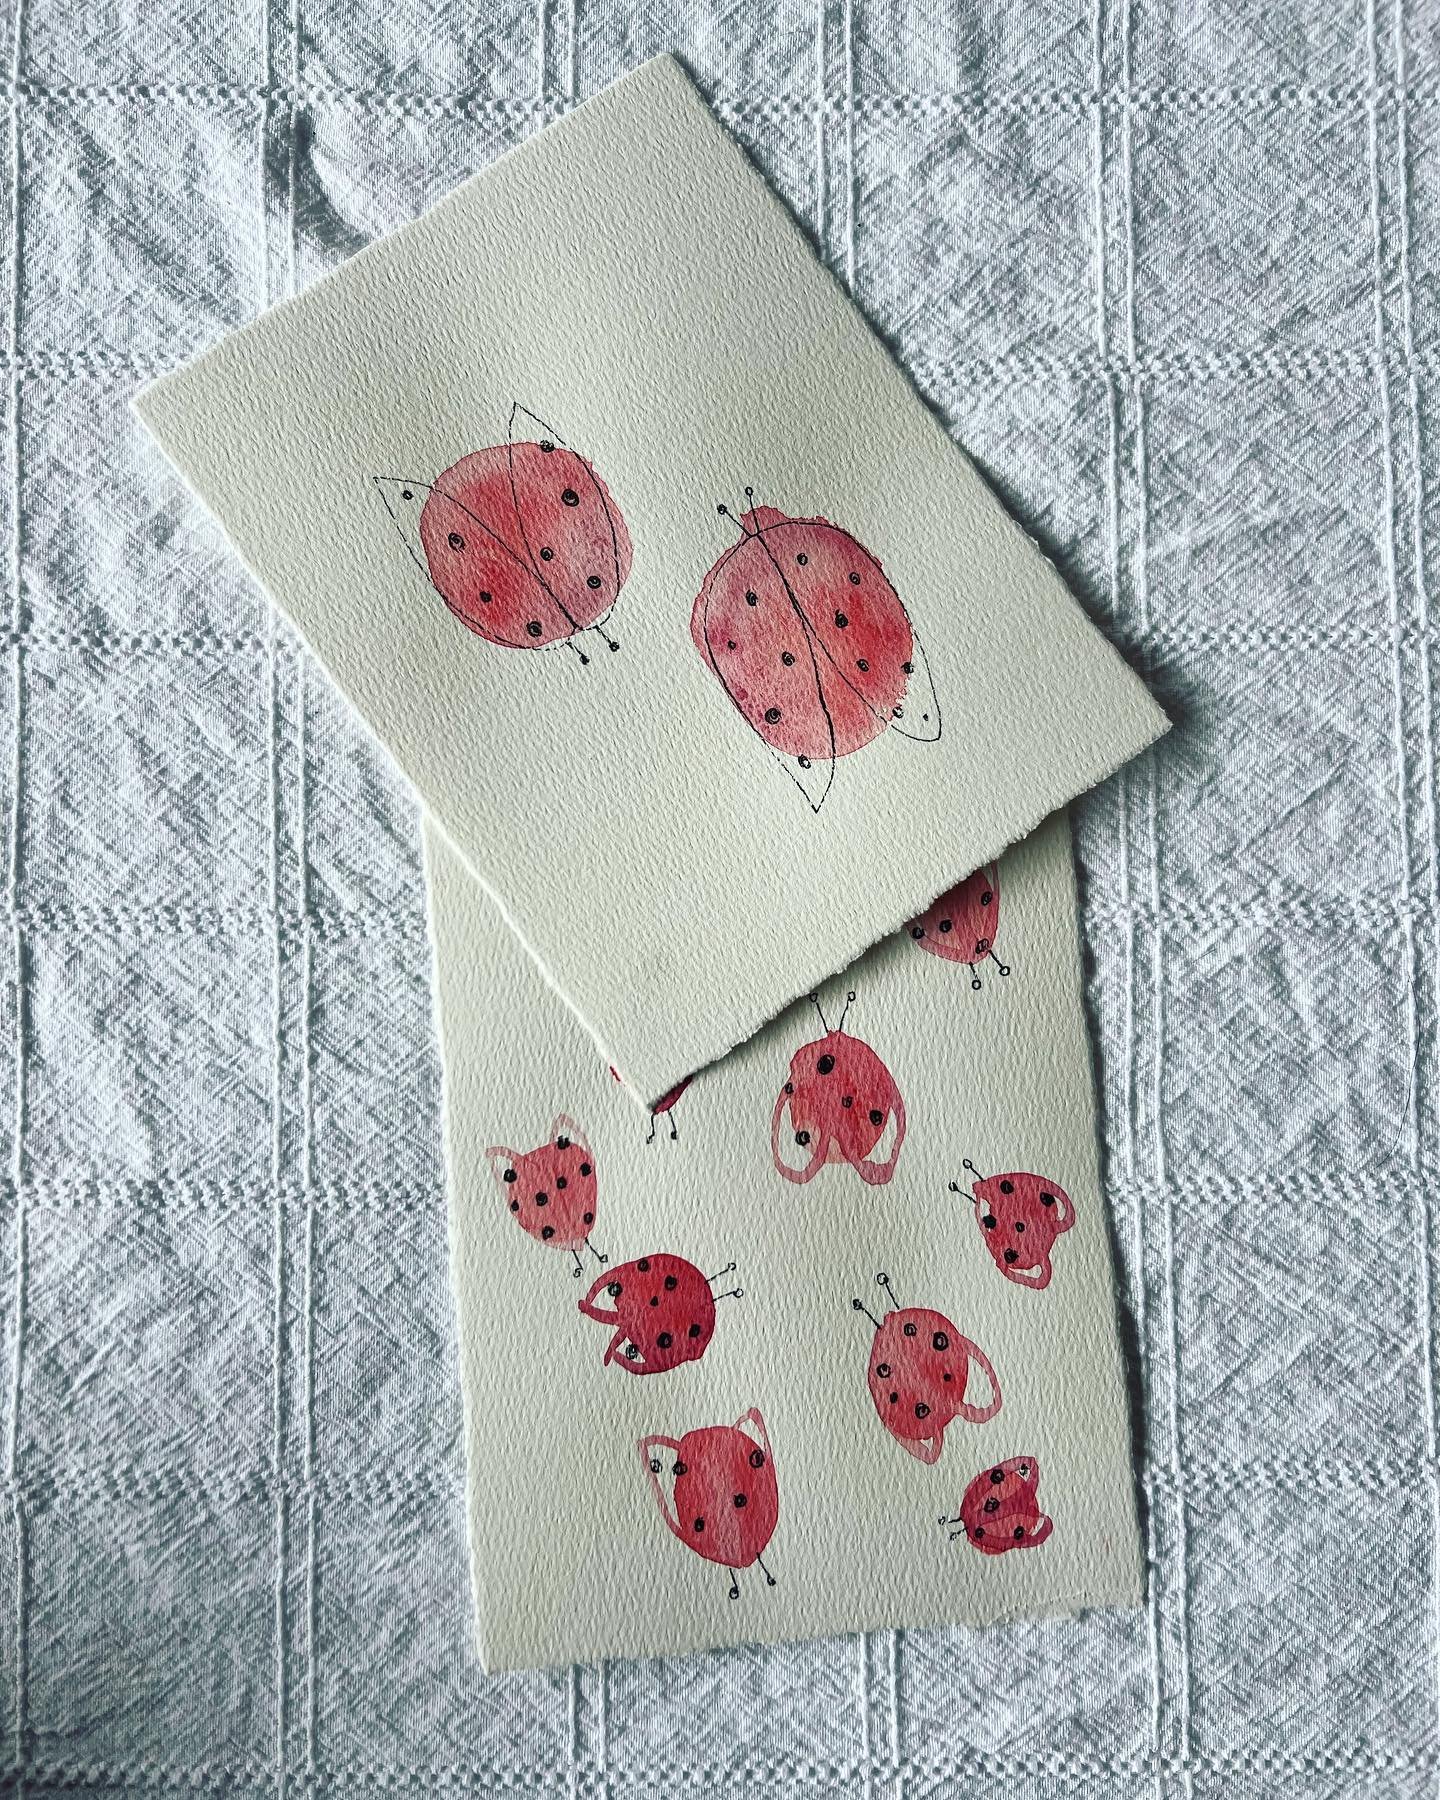 Our place is crawling with lady bugs so I obviously had to honor them! I&rsquo;m definitely taking this as a sign for love and abundance 🐞

Watercolor Originals 
+ Digital Prints
For purchase at meetcutestudios.Etsy.com
&hellip;&hellip;&hellip;&hell